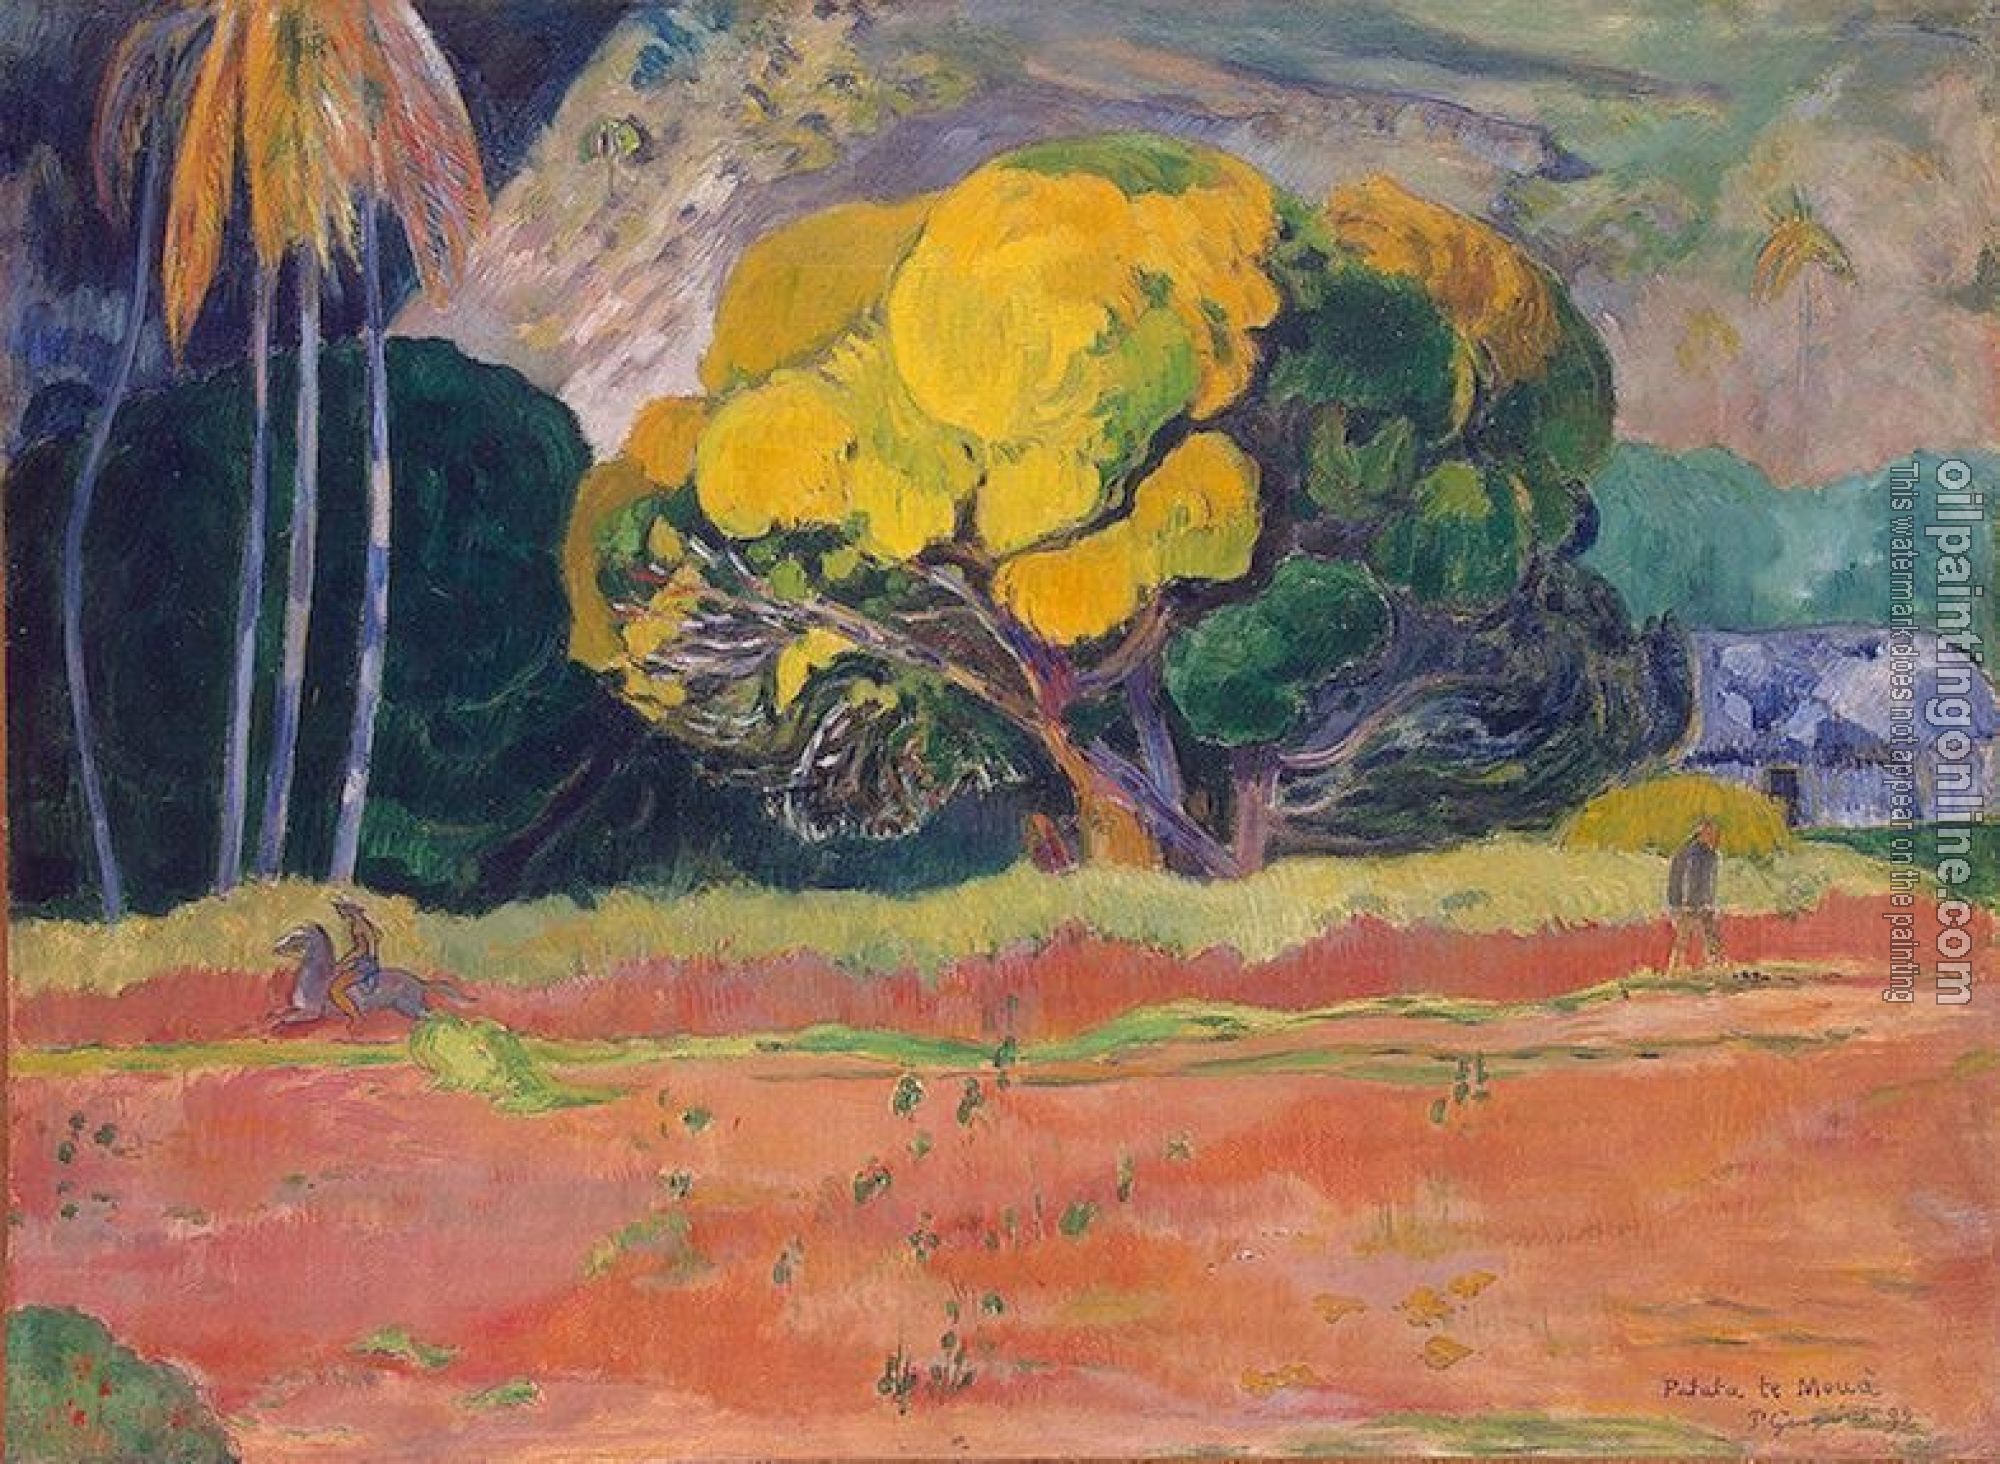 Gauguin, Paul - At the Foot of the Mountain